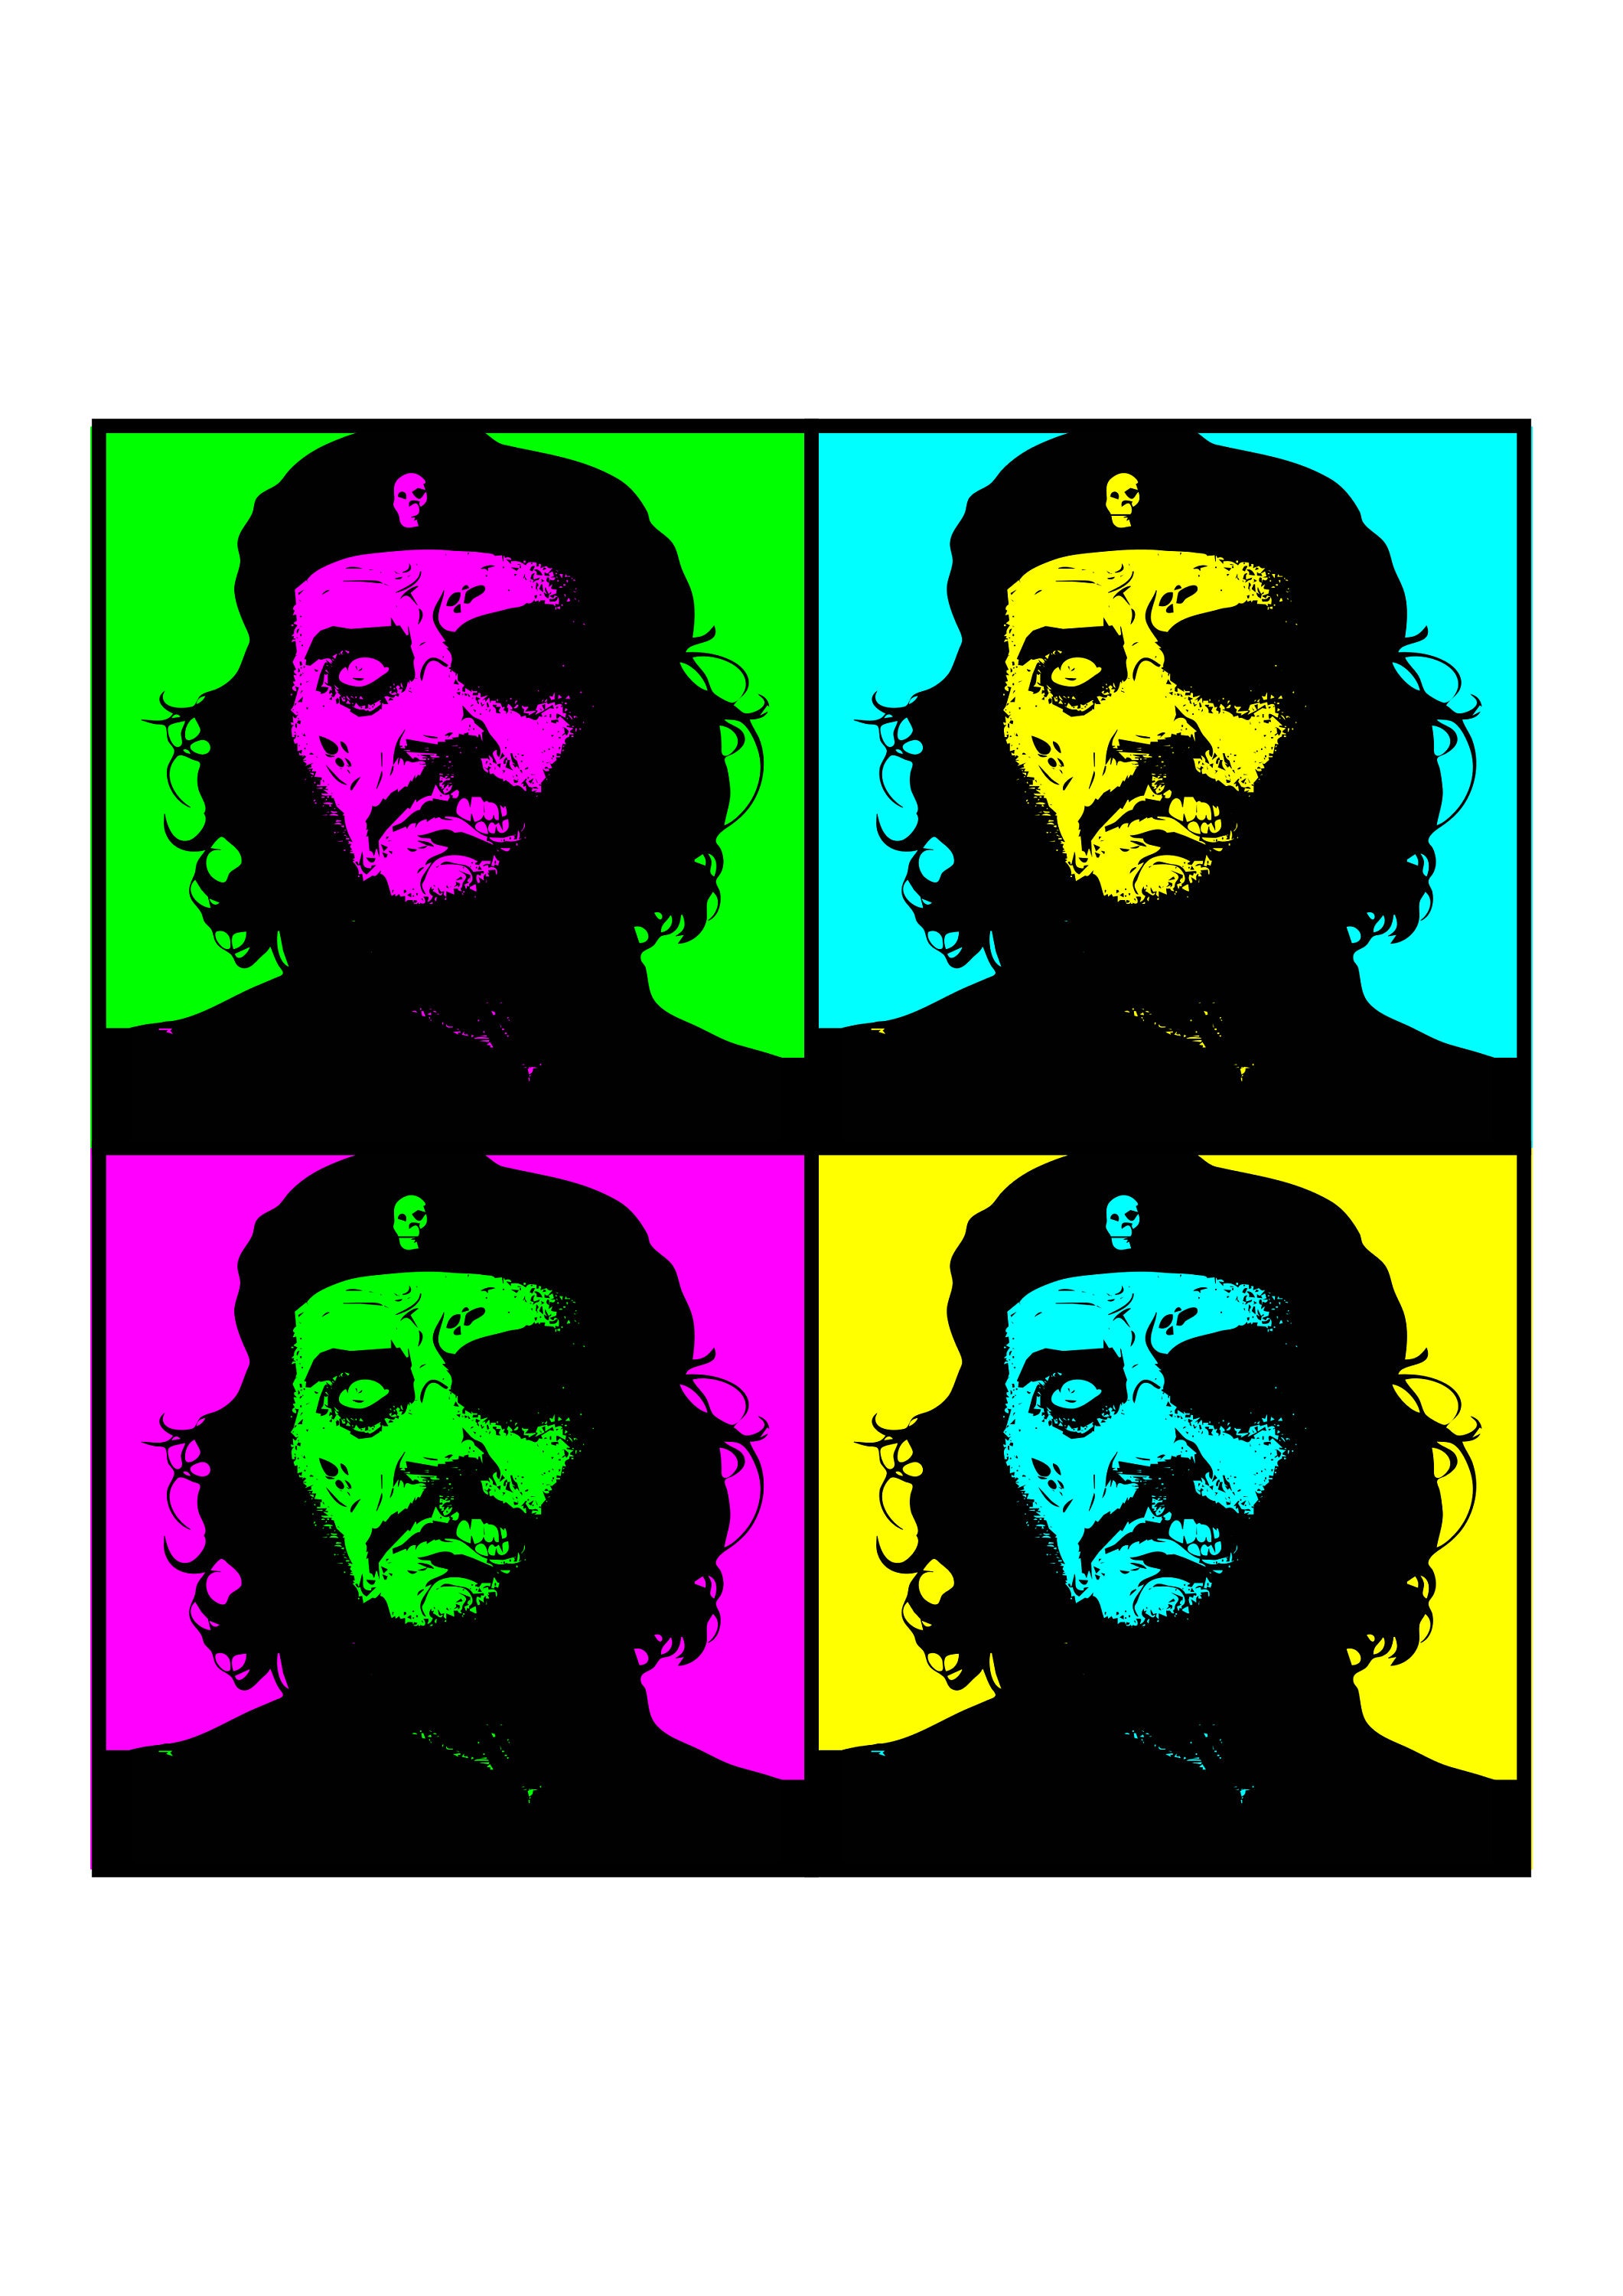 File:Che Guevara poster.svg - Wikimedia Commons